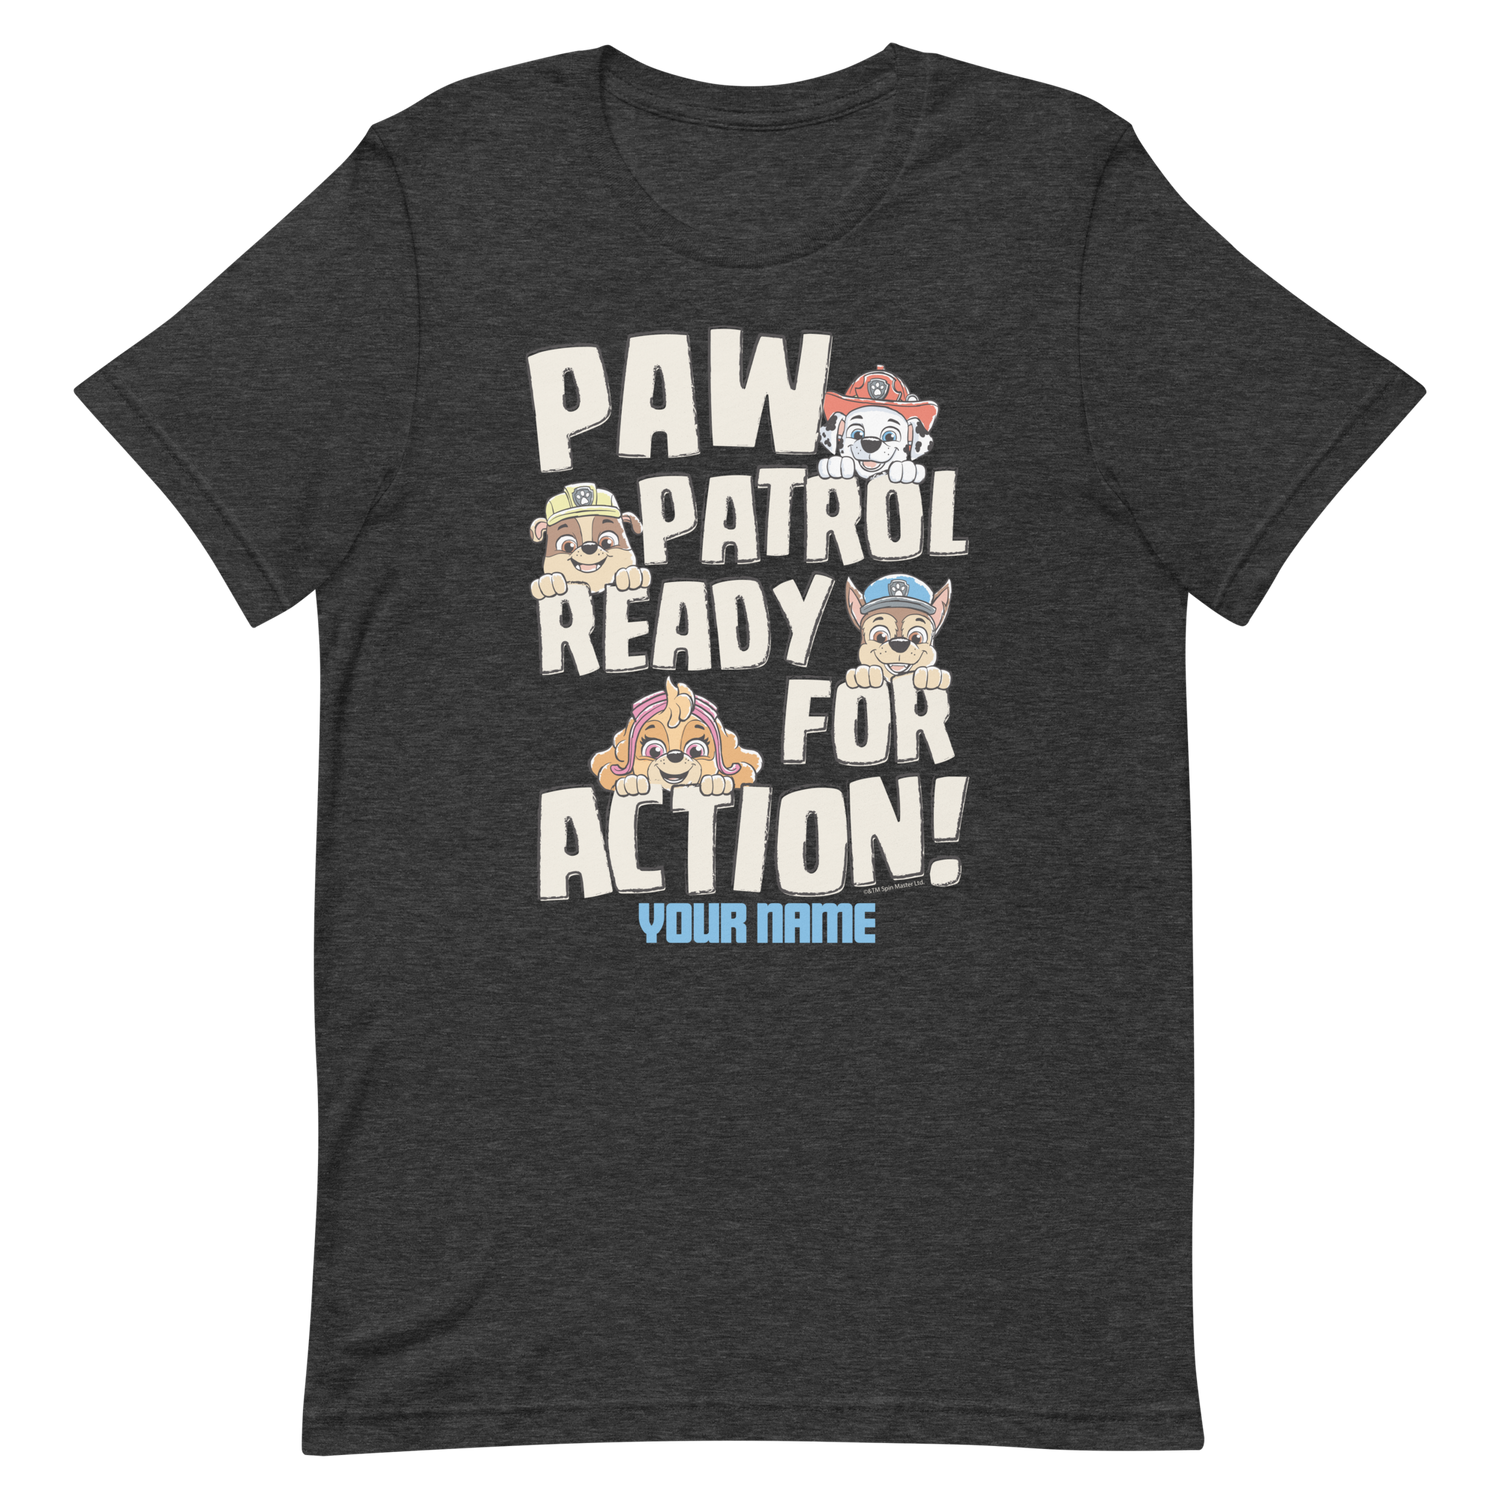 Ready Sleeve Personalized Action Patrol PAW Adult Shop T-Shirt Paramount For – Short